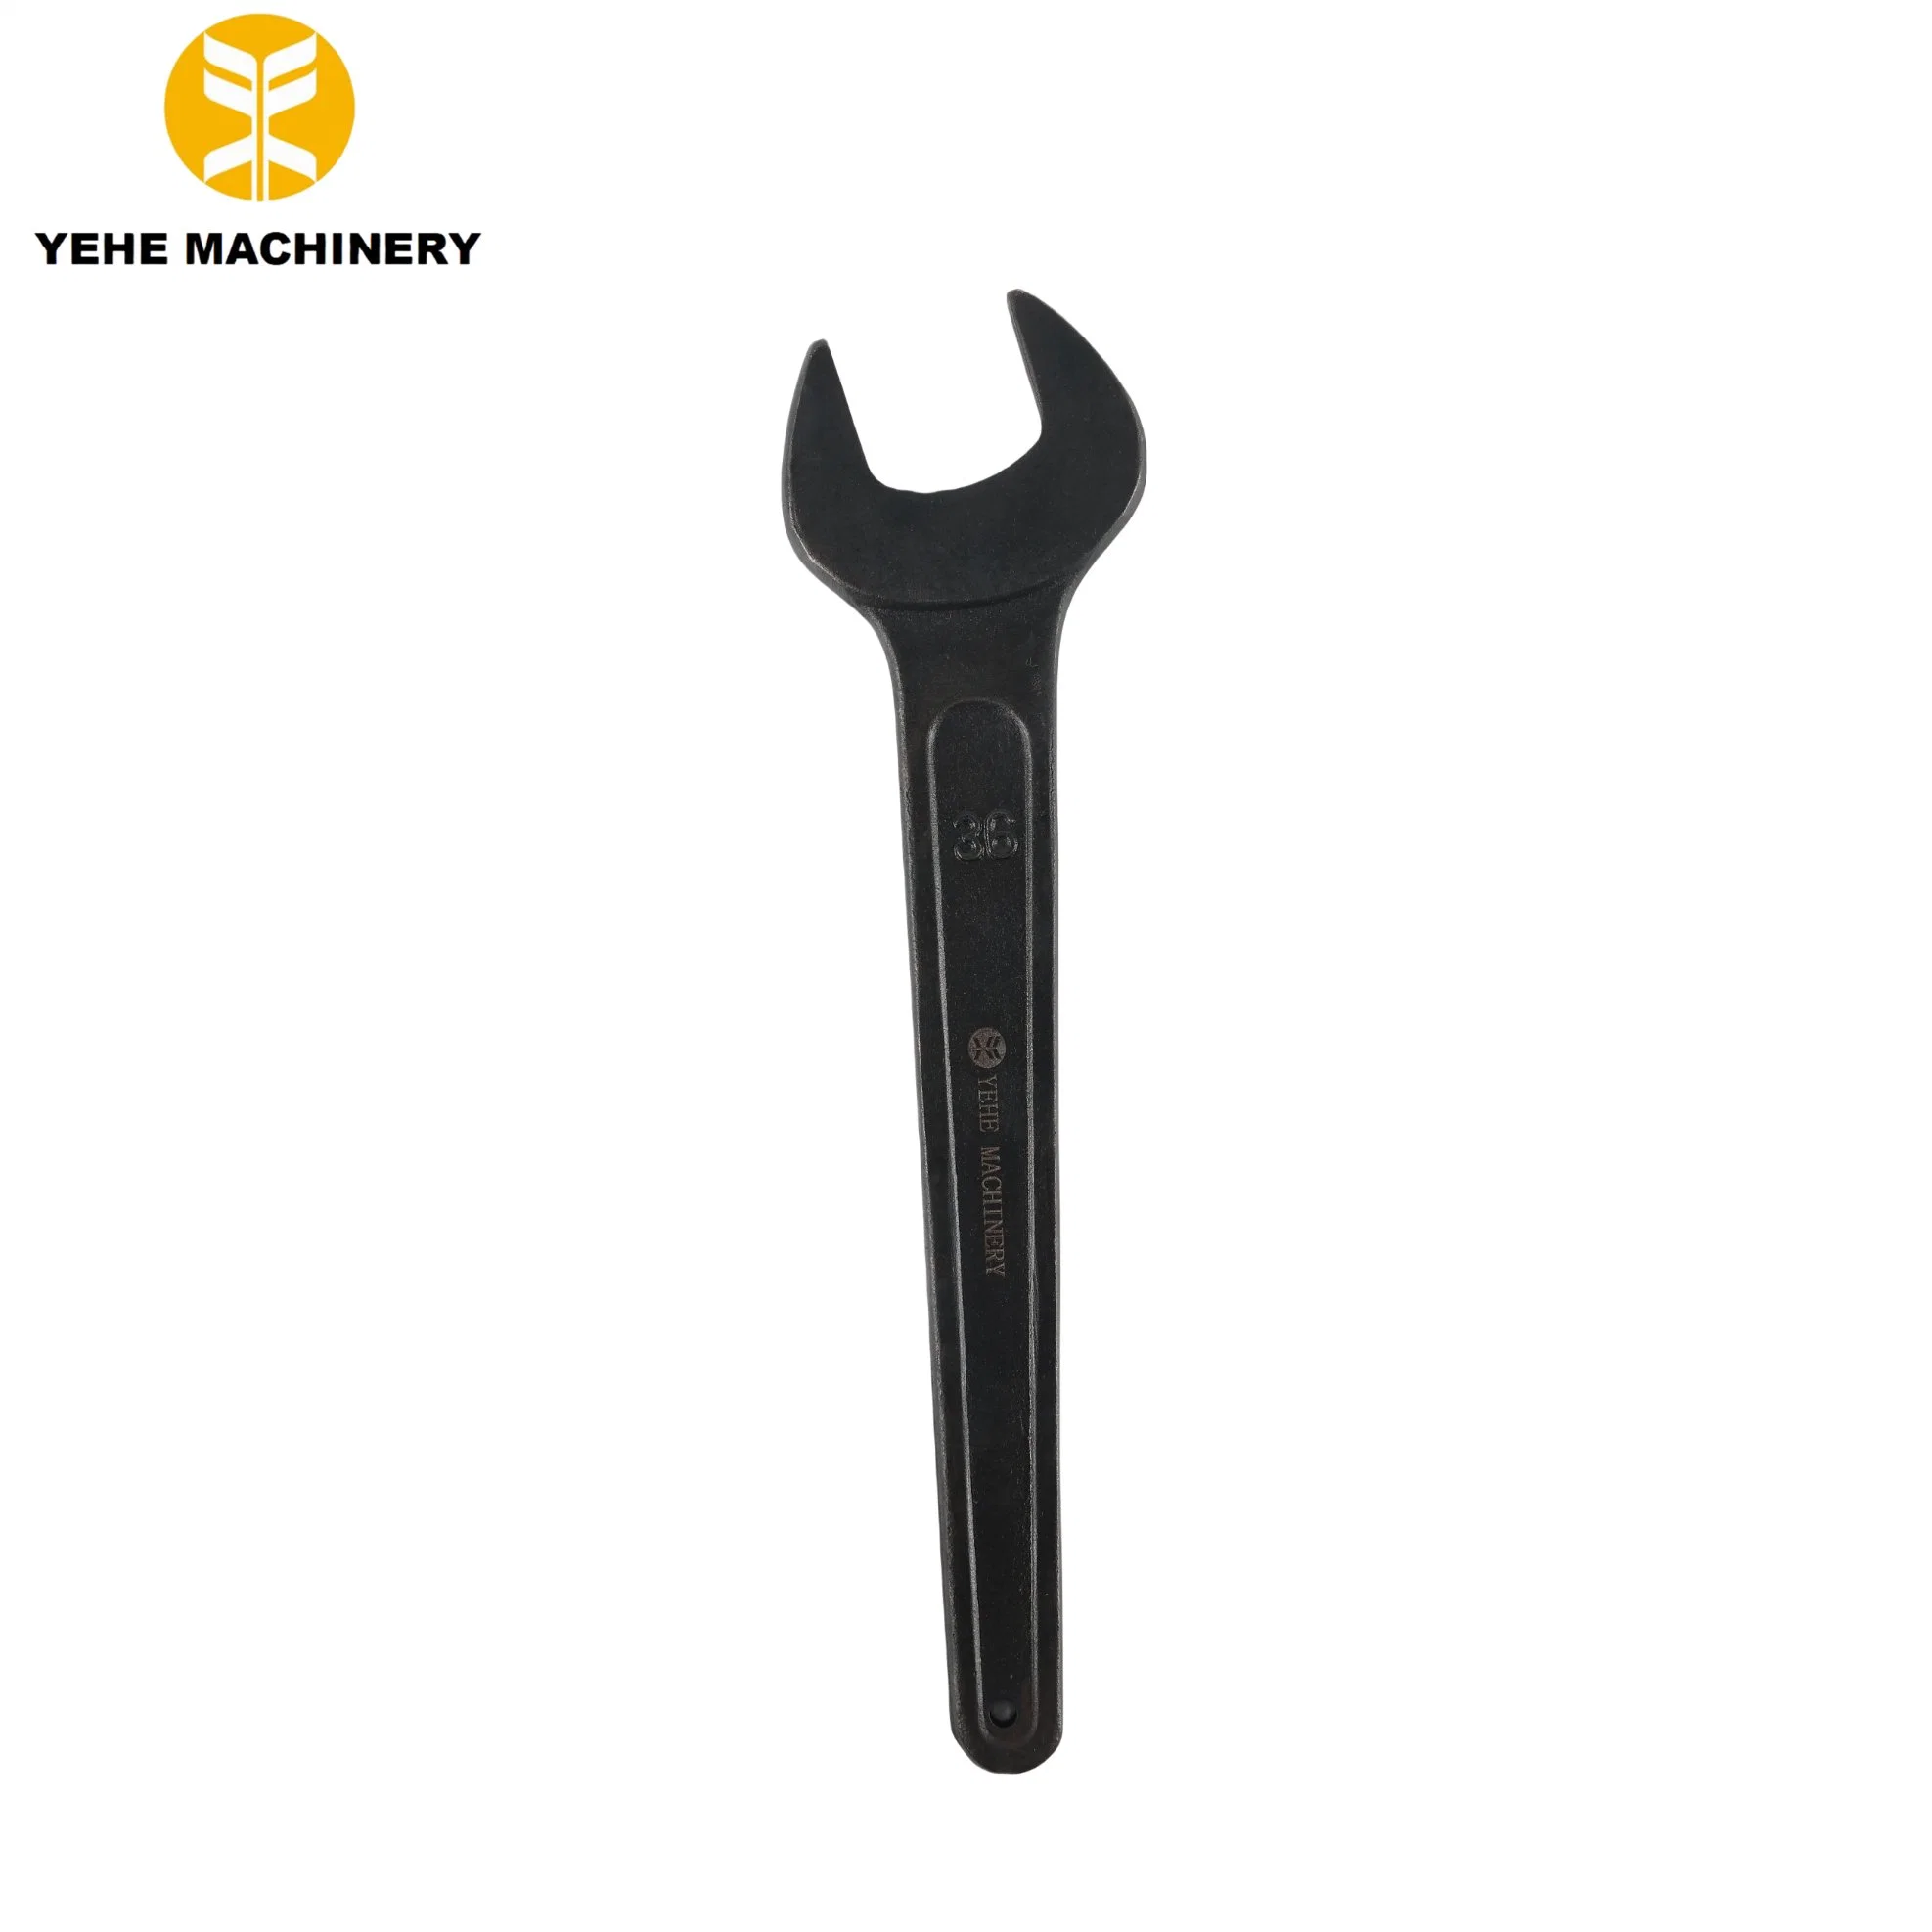 Customized Logo High Strength Galvanized Forged Car Motorcycle Repair Hand Tools Double Open End Wrench